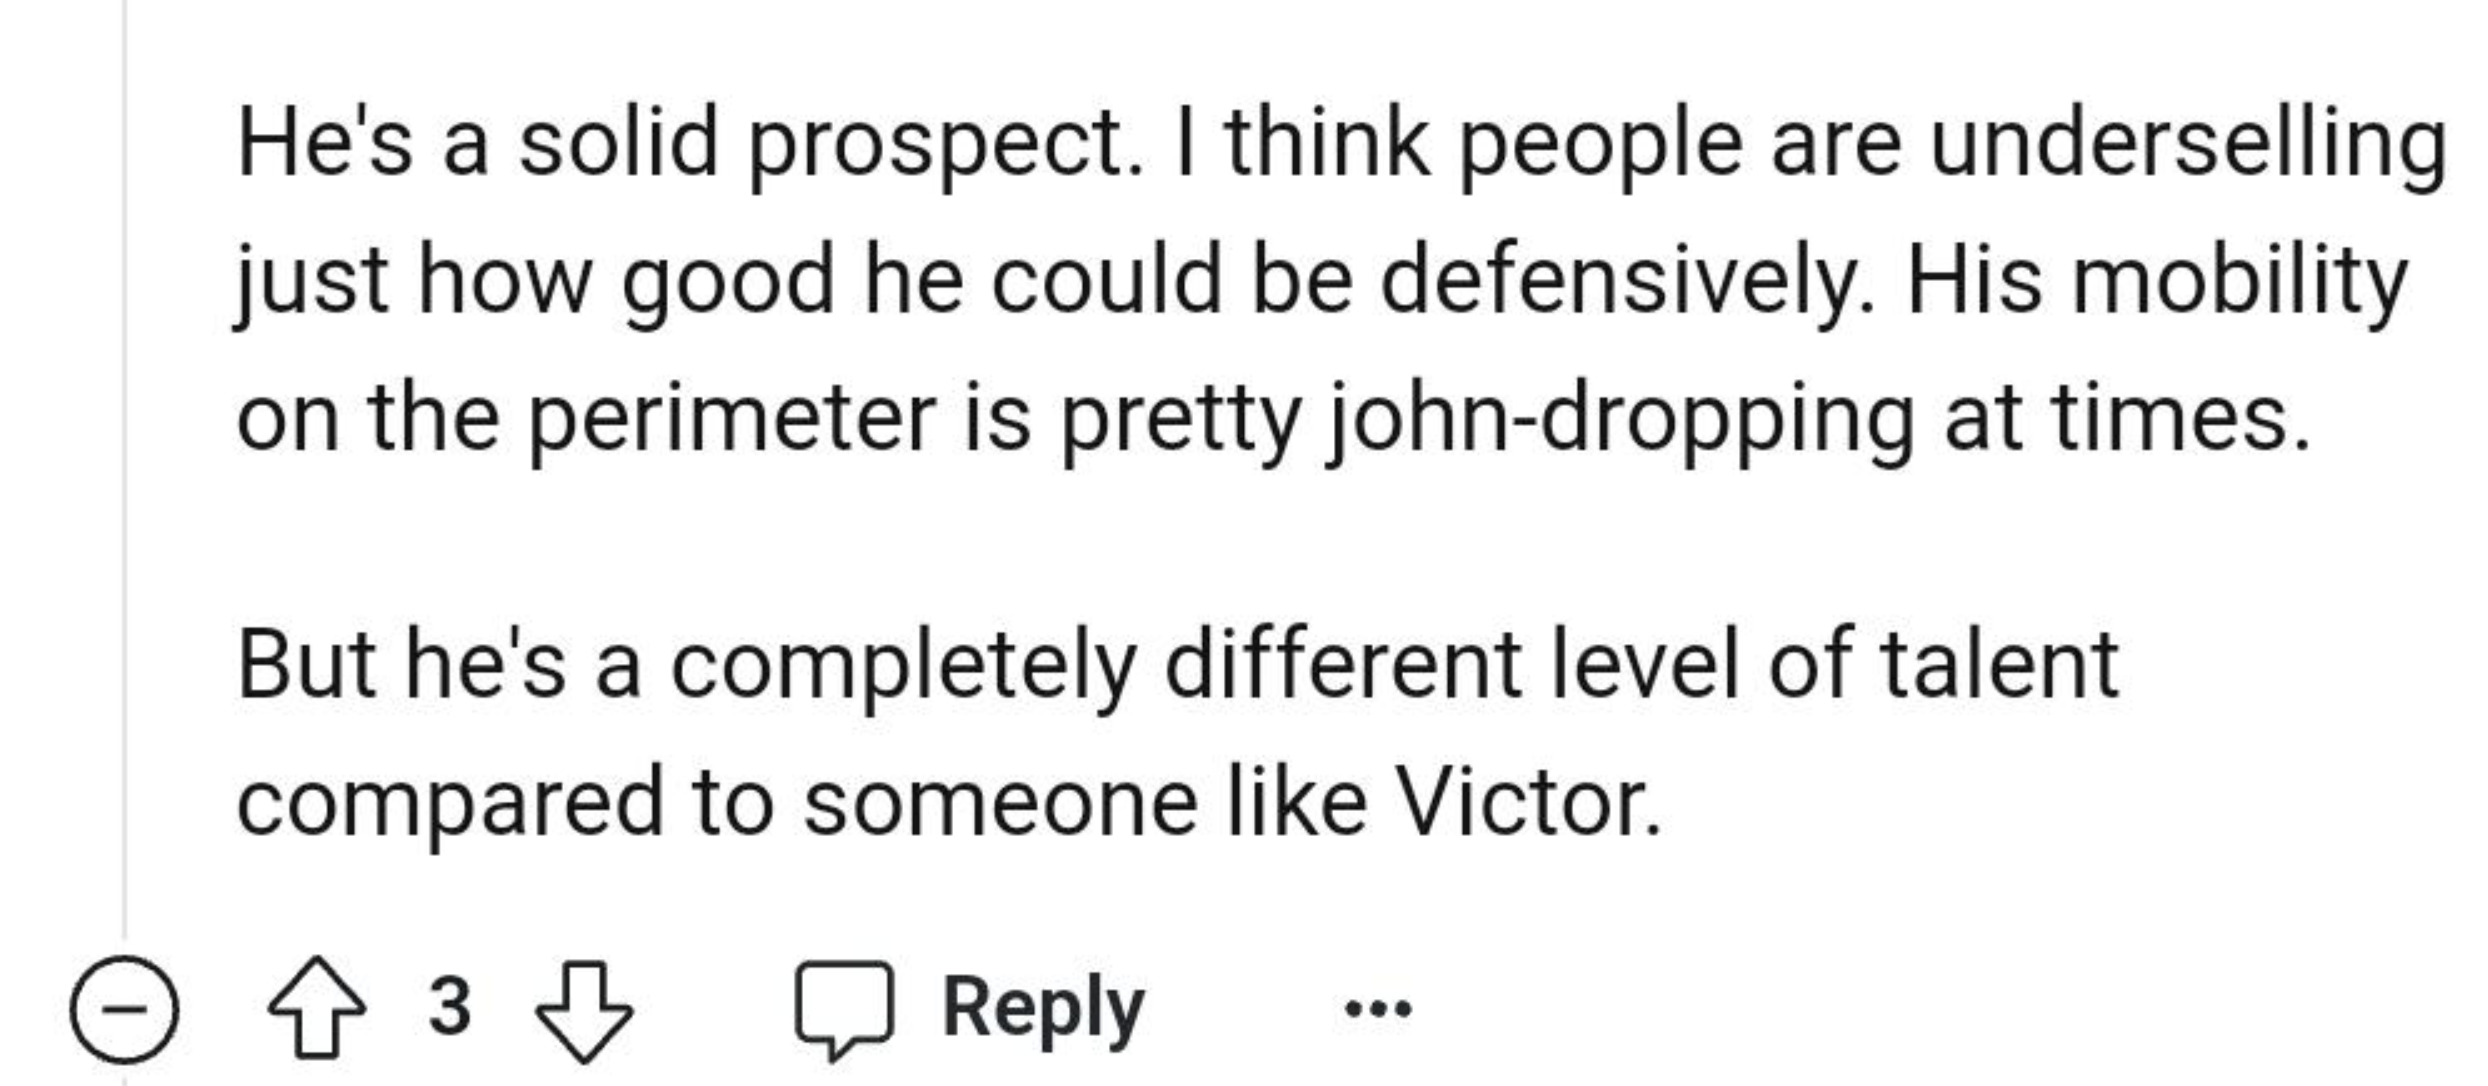 number - He's a solid prospect. I think people are underselling just how good he could be defensively. His mobility on the perimeter is pretty johndropping at times. But he's a completely different level of talent compared to someone Victor. 3 3